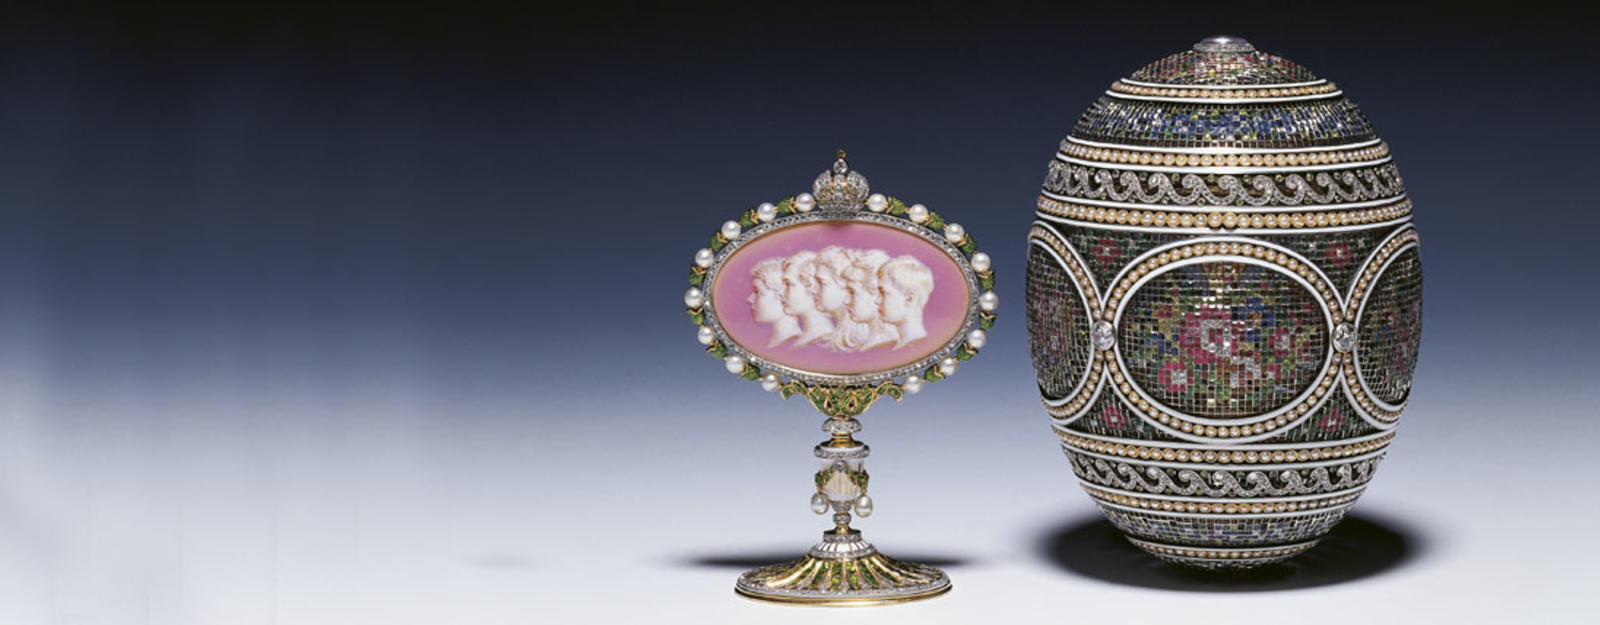 View of Fabergé's Mosaic Egg and Surprise